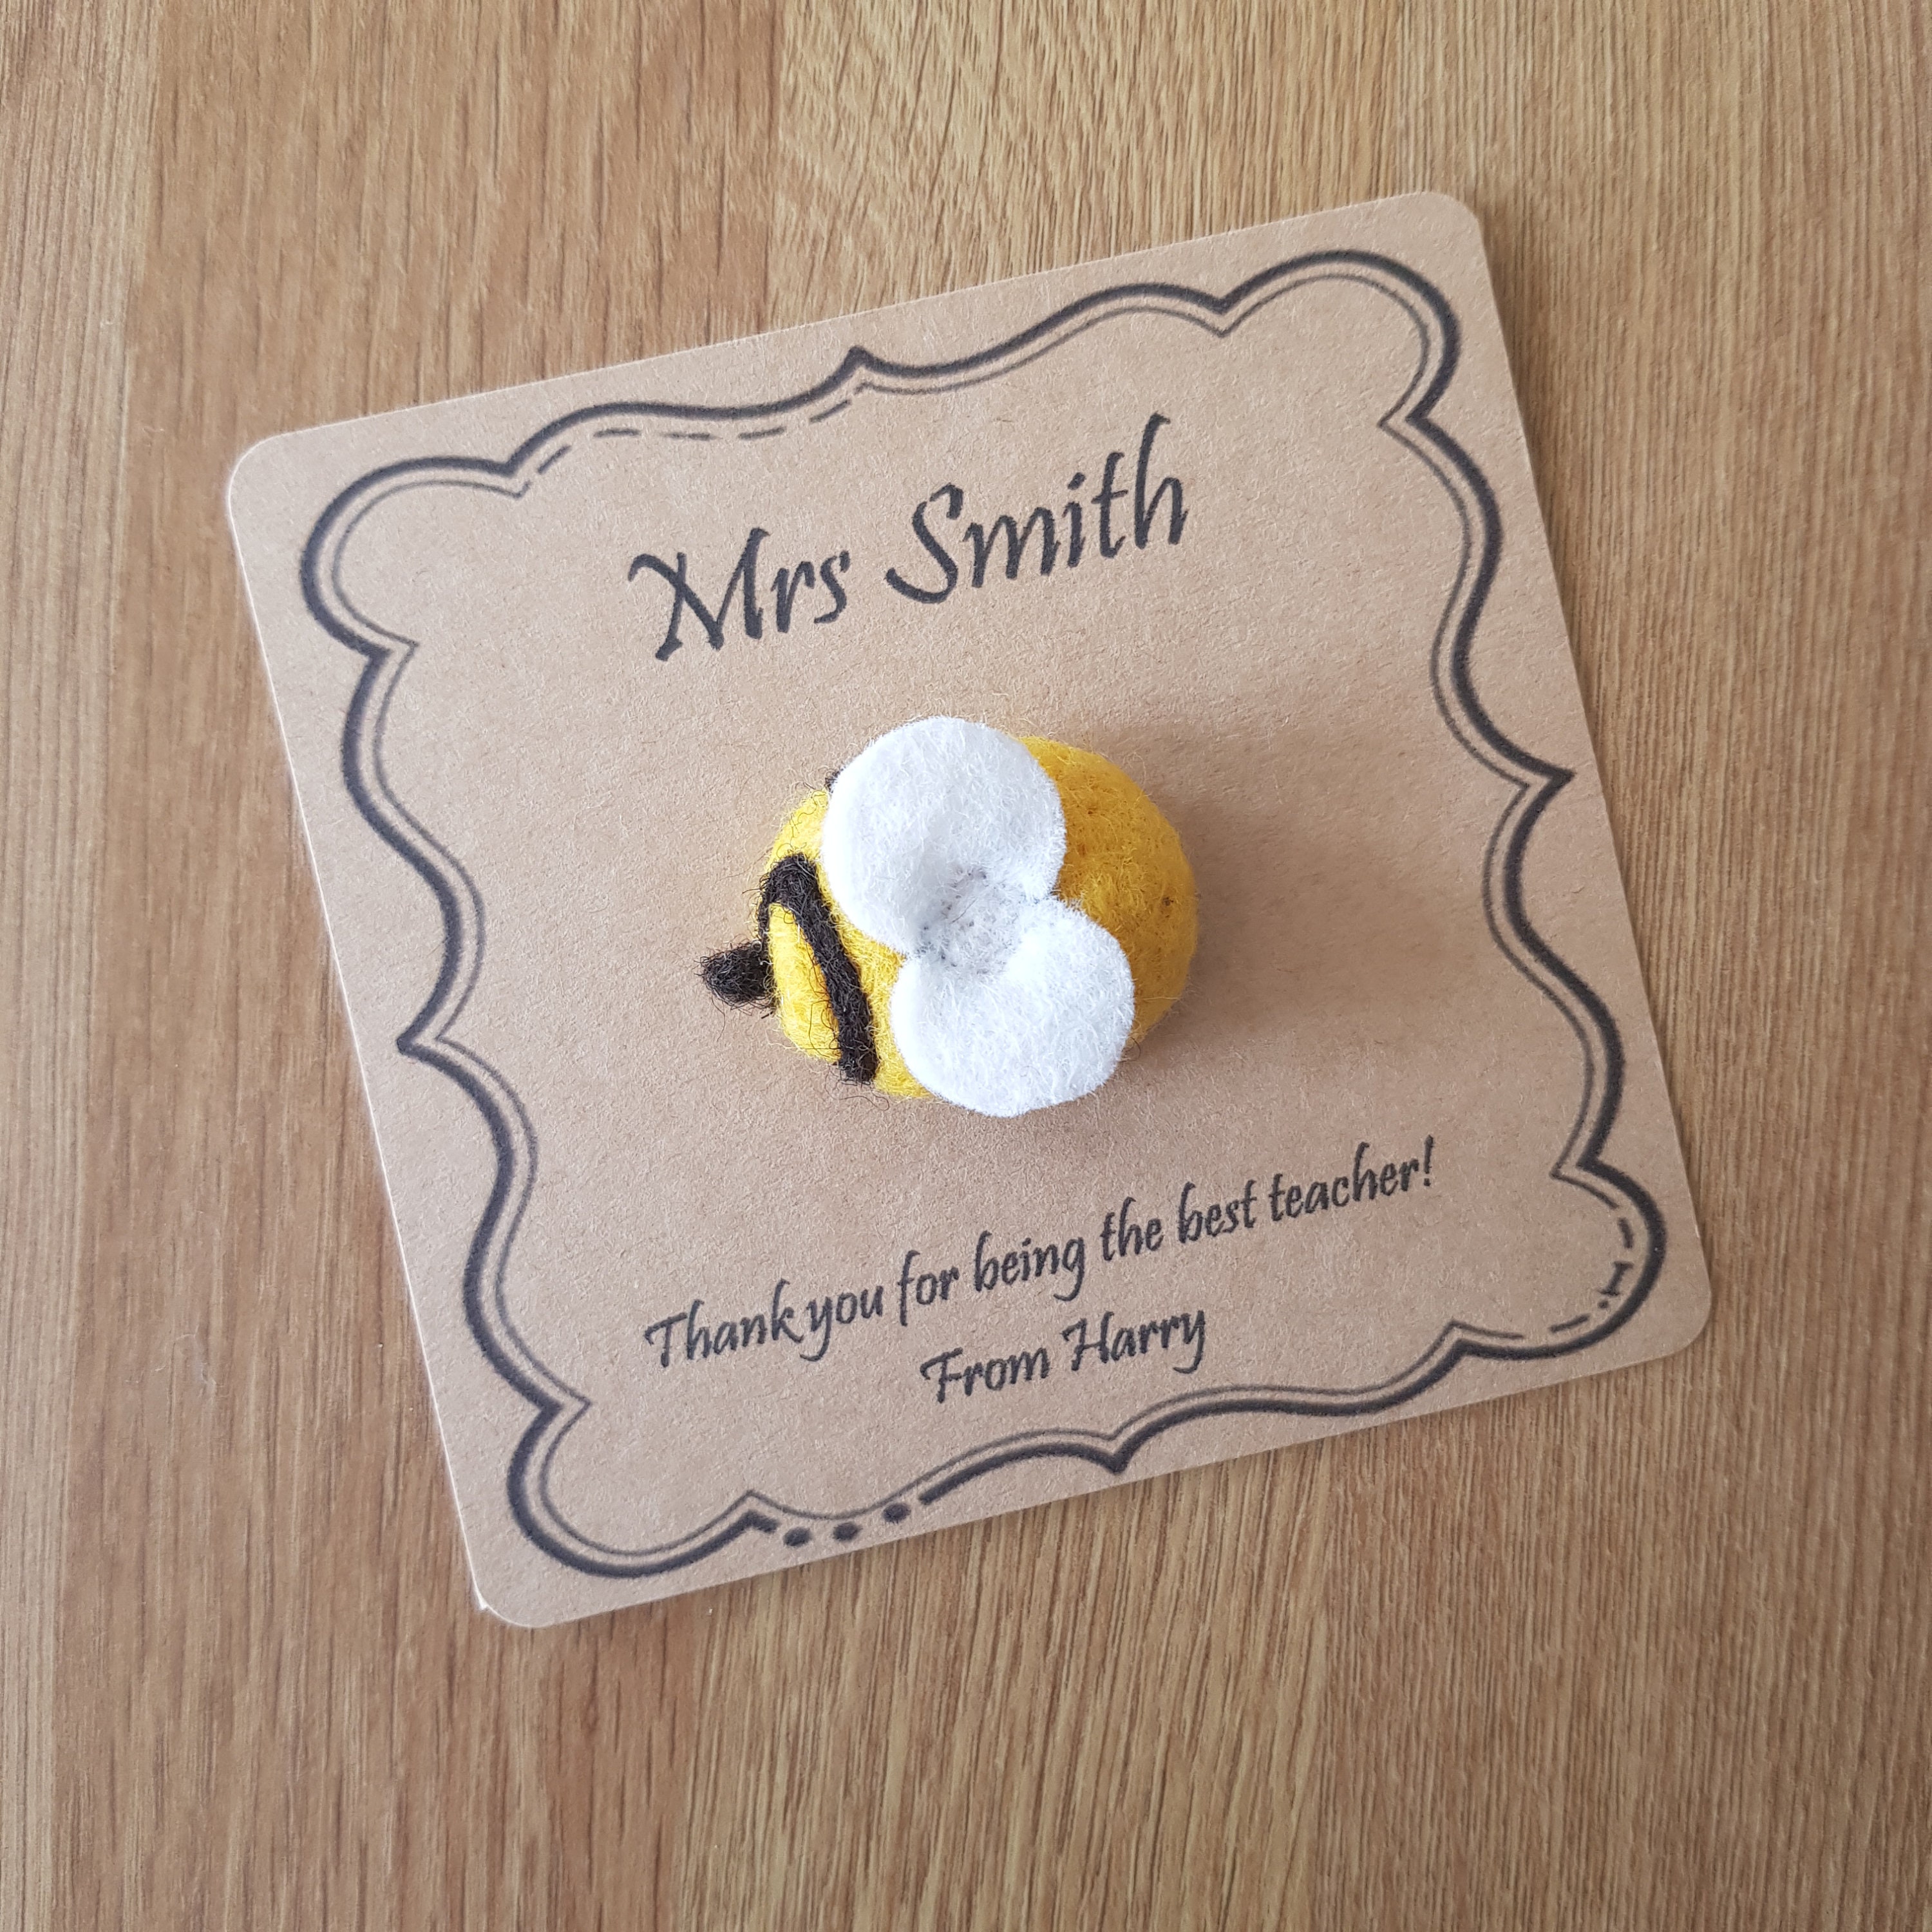 Personalised Gift Needle Felted Bee Brooch Handmade in Yellow & Black Wool With White Wings Cute Pin Humble Bumble. Birthday